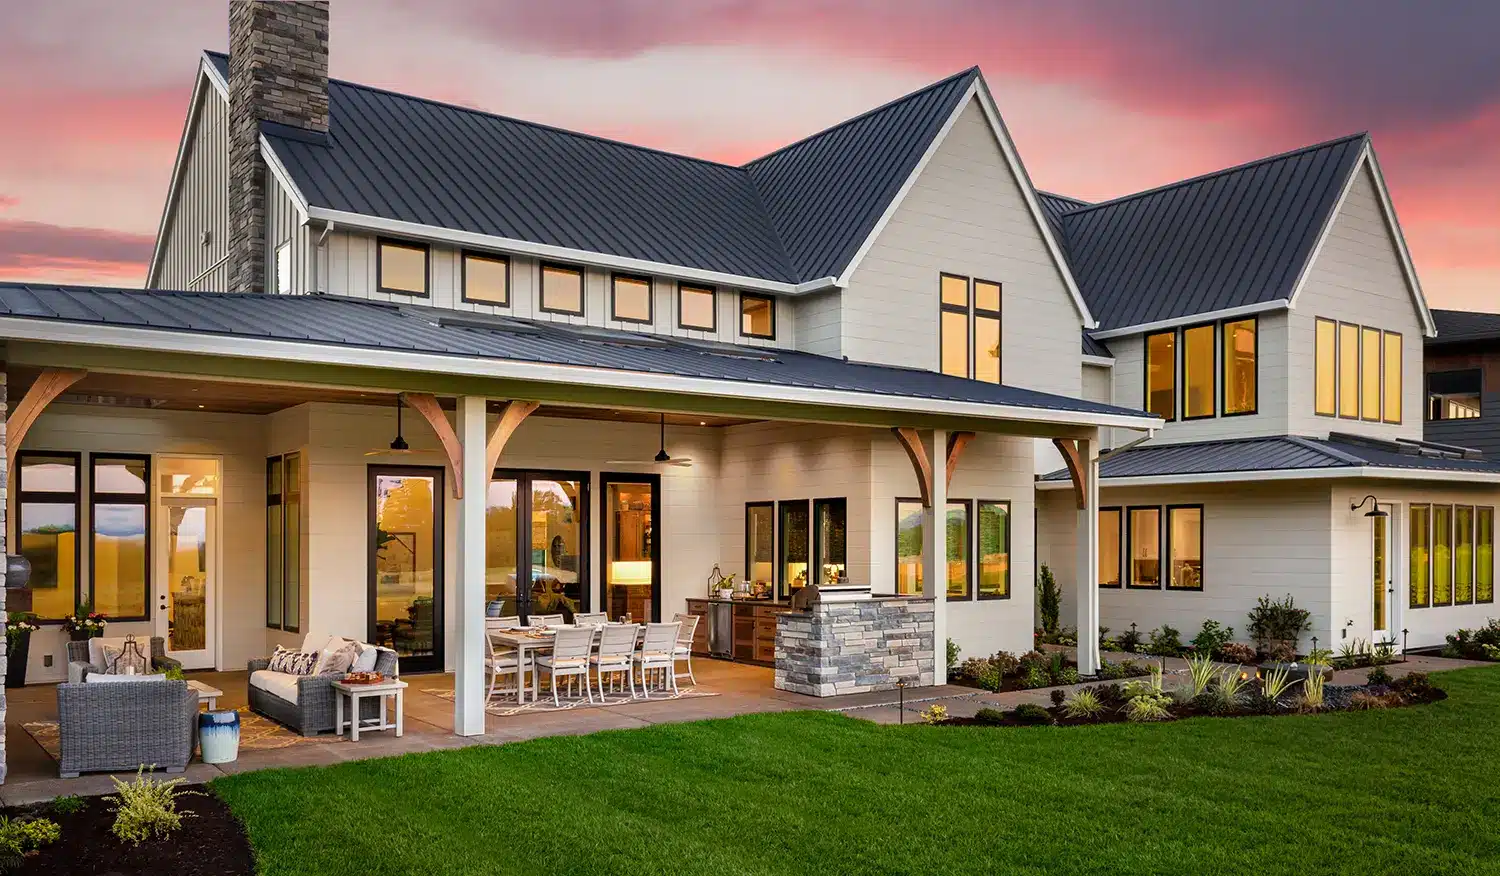 The ROI of Exterior Remodeling Projects